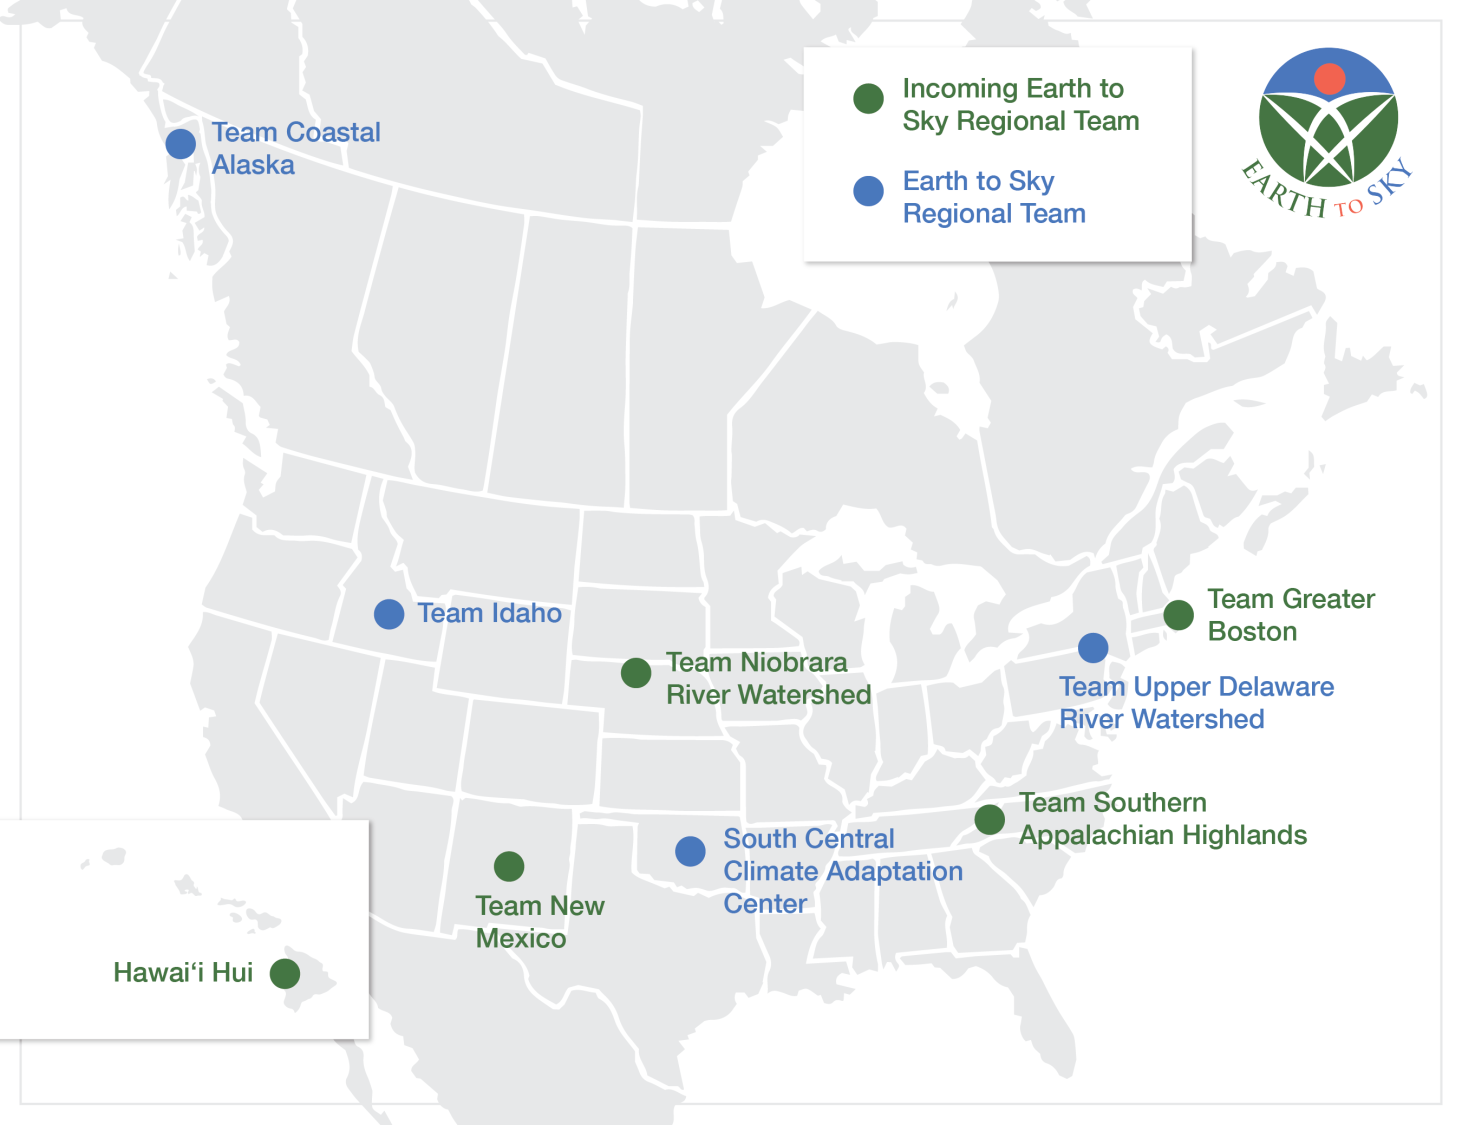 Map of North America showing the locations of the existing and new regional teams